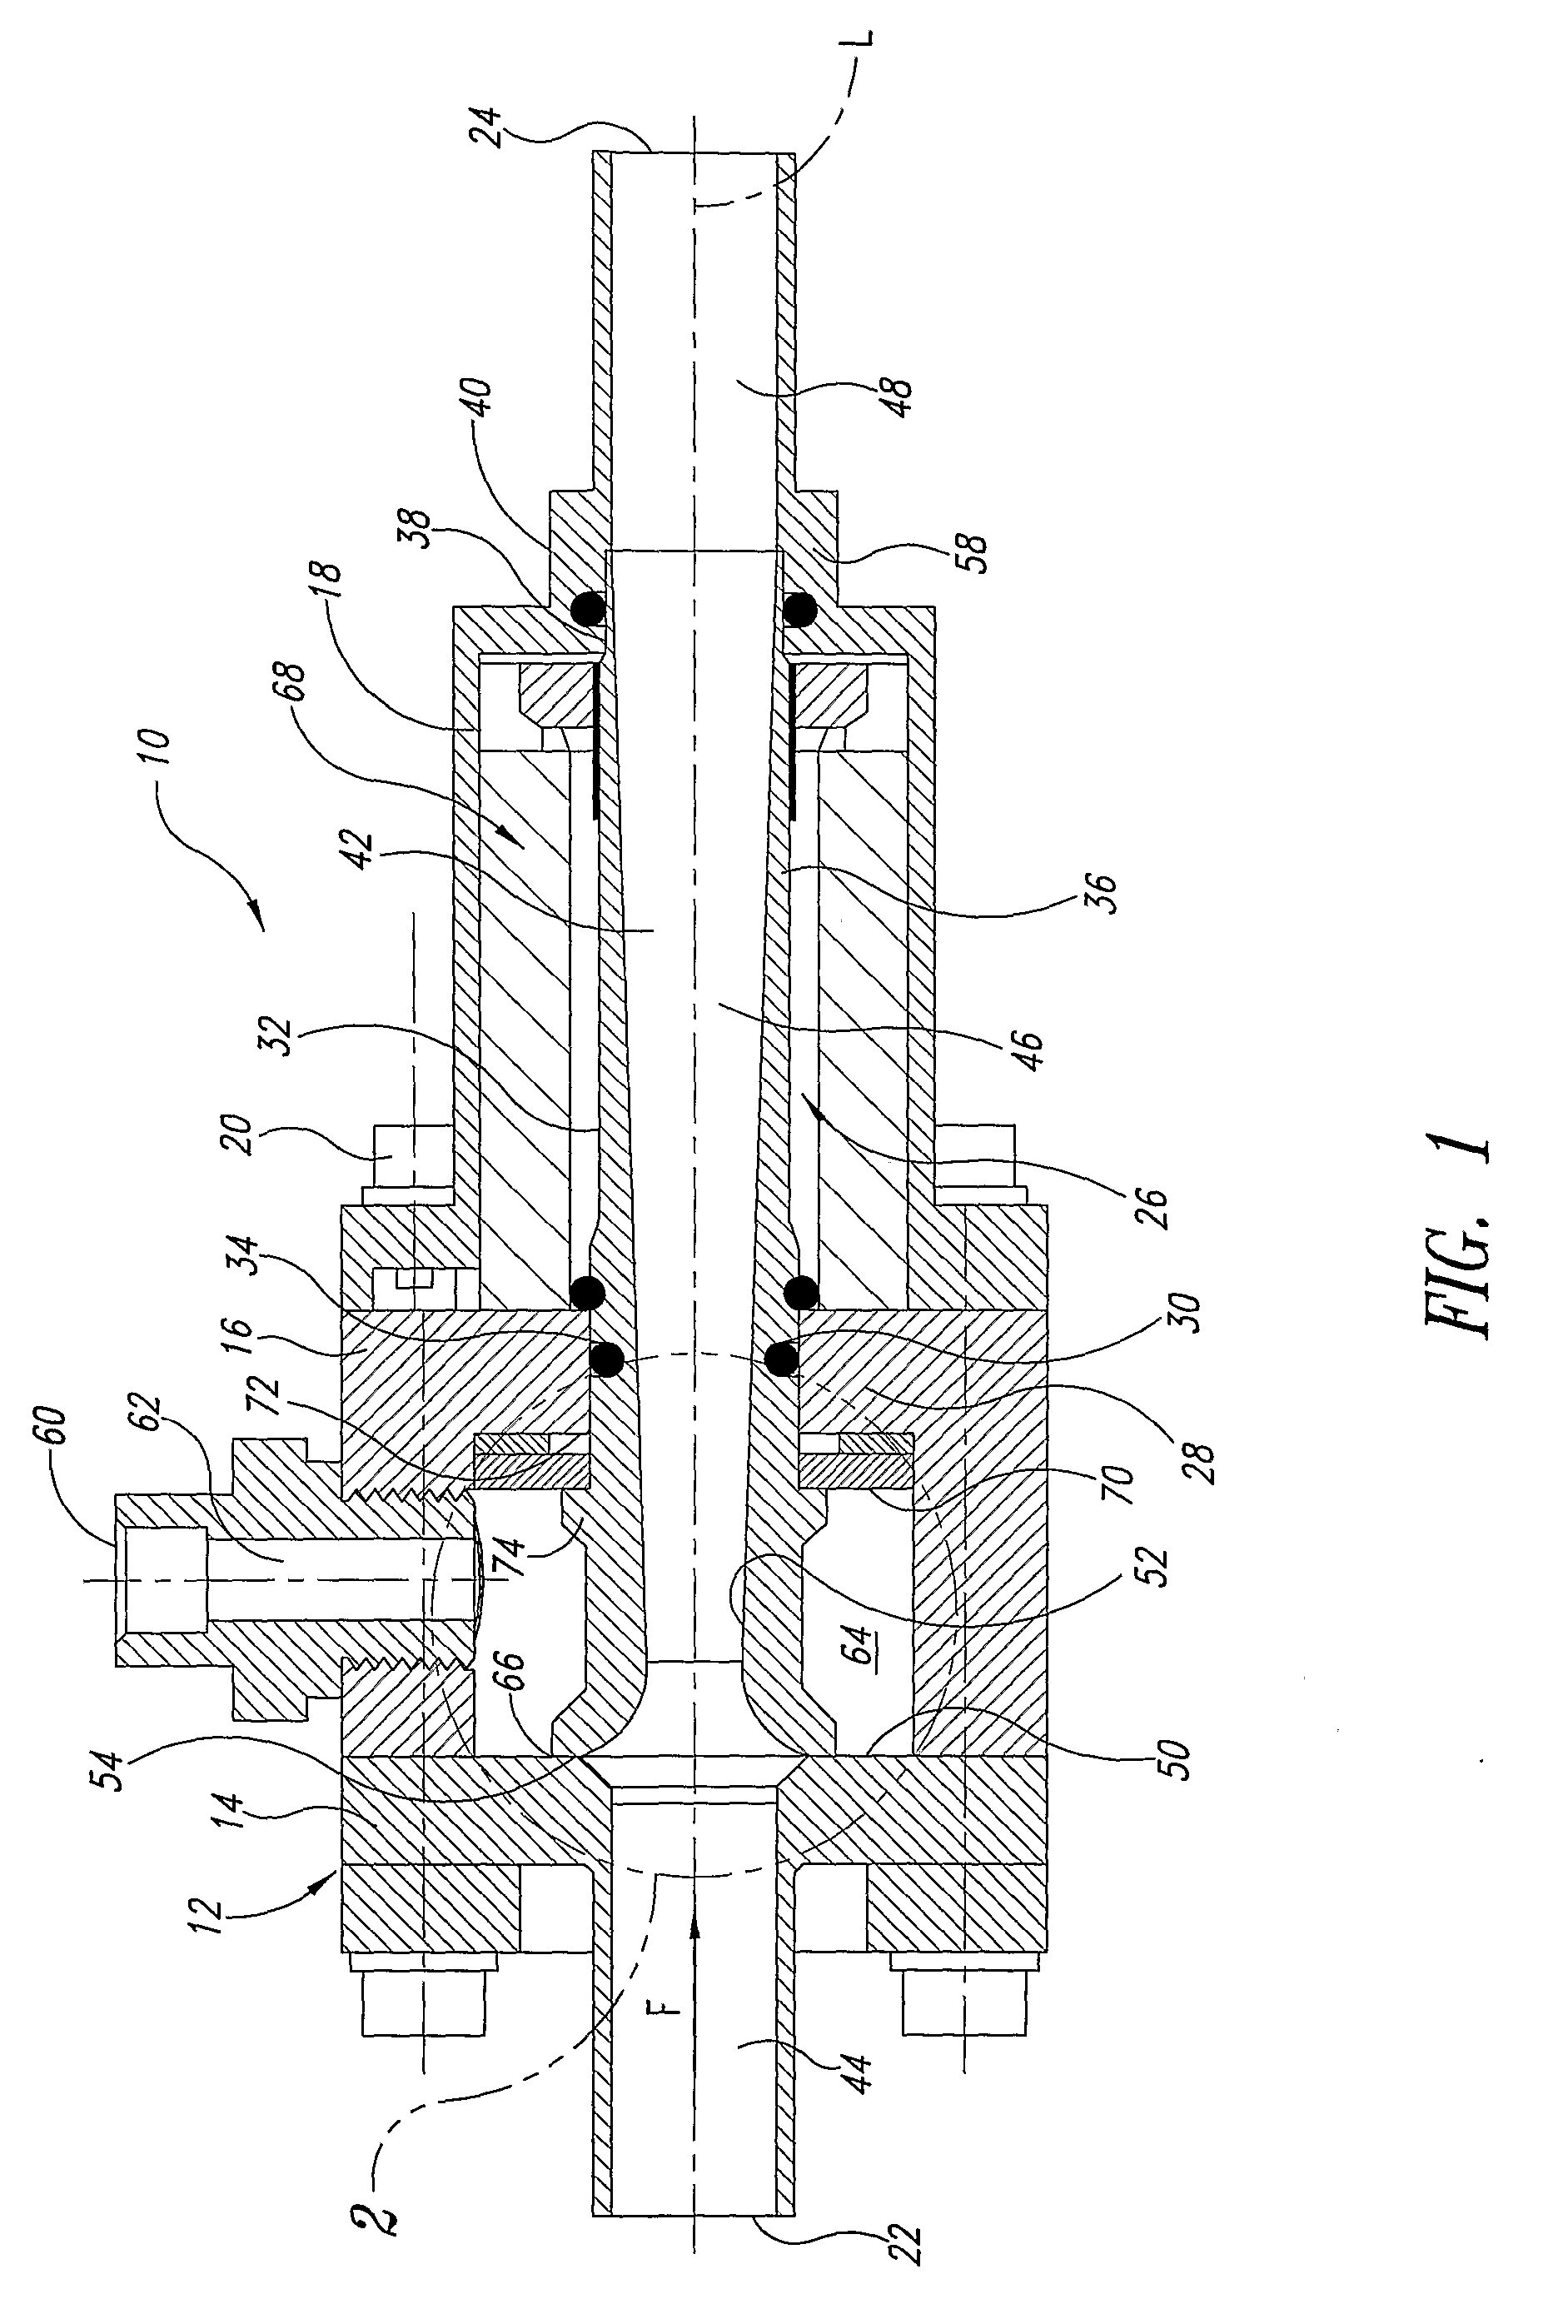 Fuel Cell System with Variable Coanda Amplifiers for Gas Recirculation and System Pressure Regulation